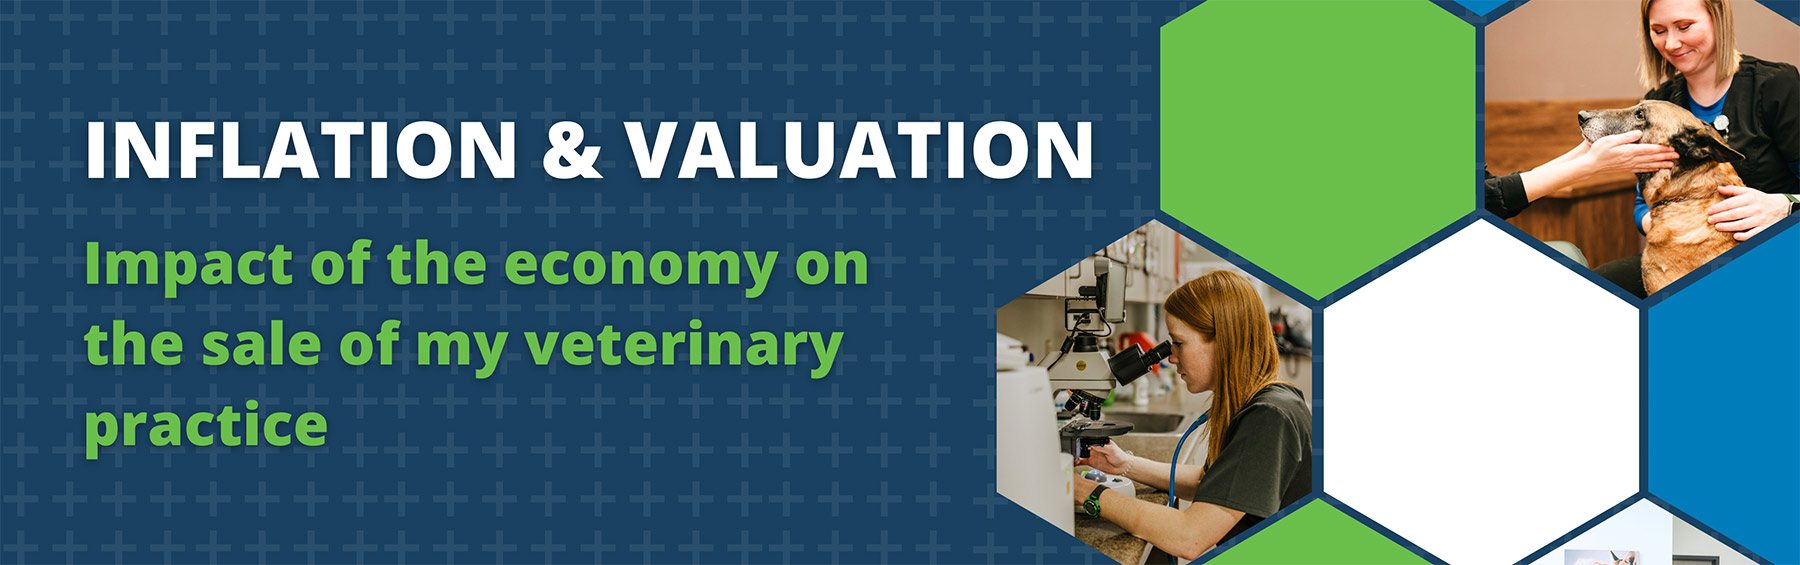 Inflation & Valuation: Impact of the economy on the sale of my veterinary practice